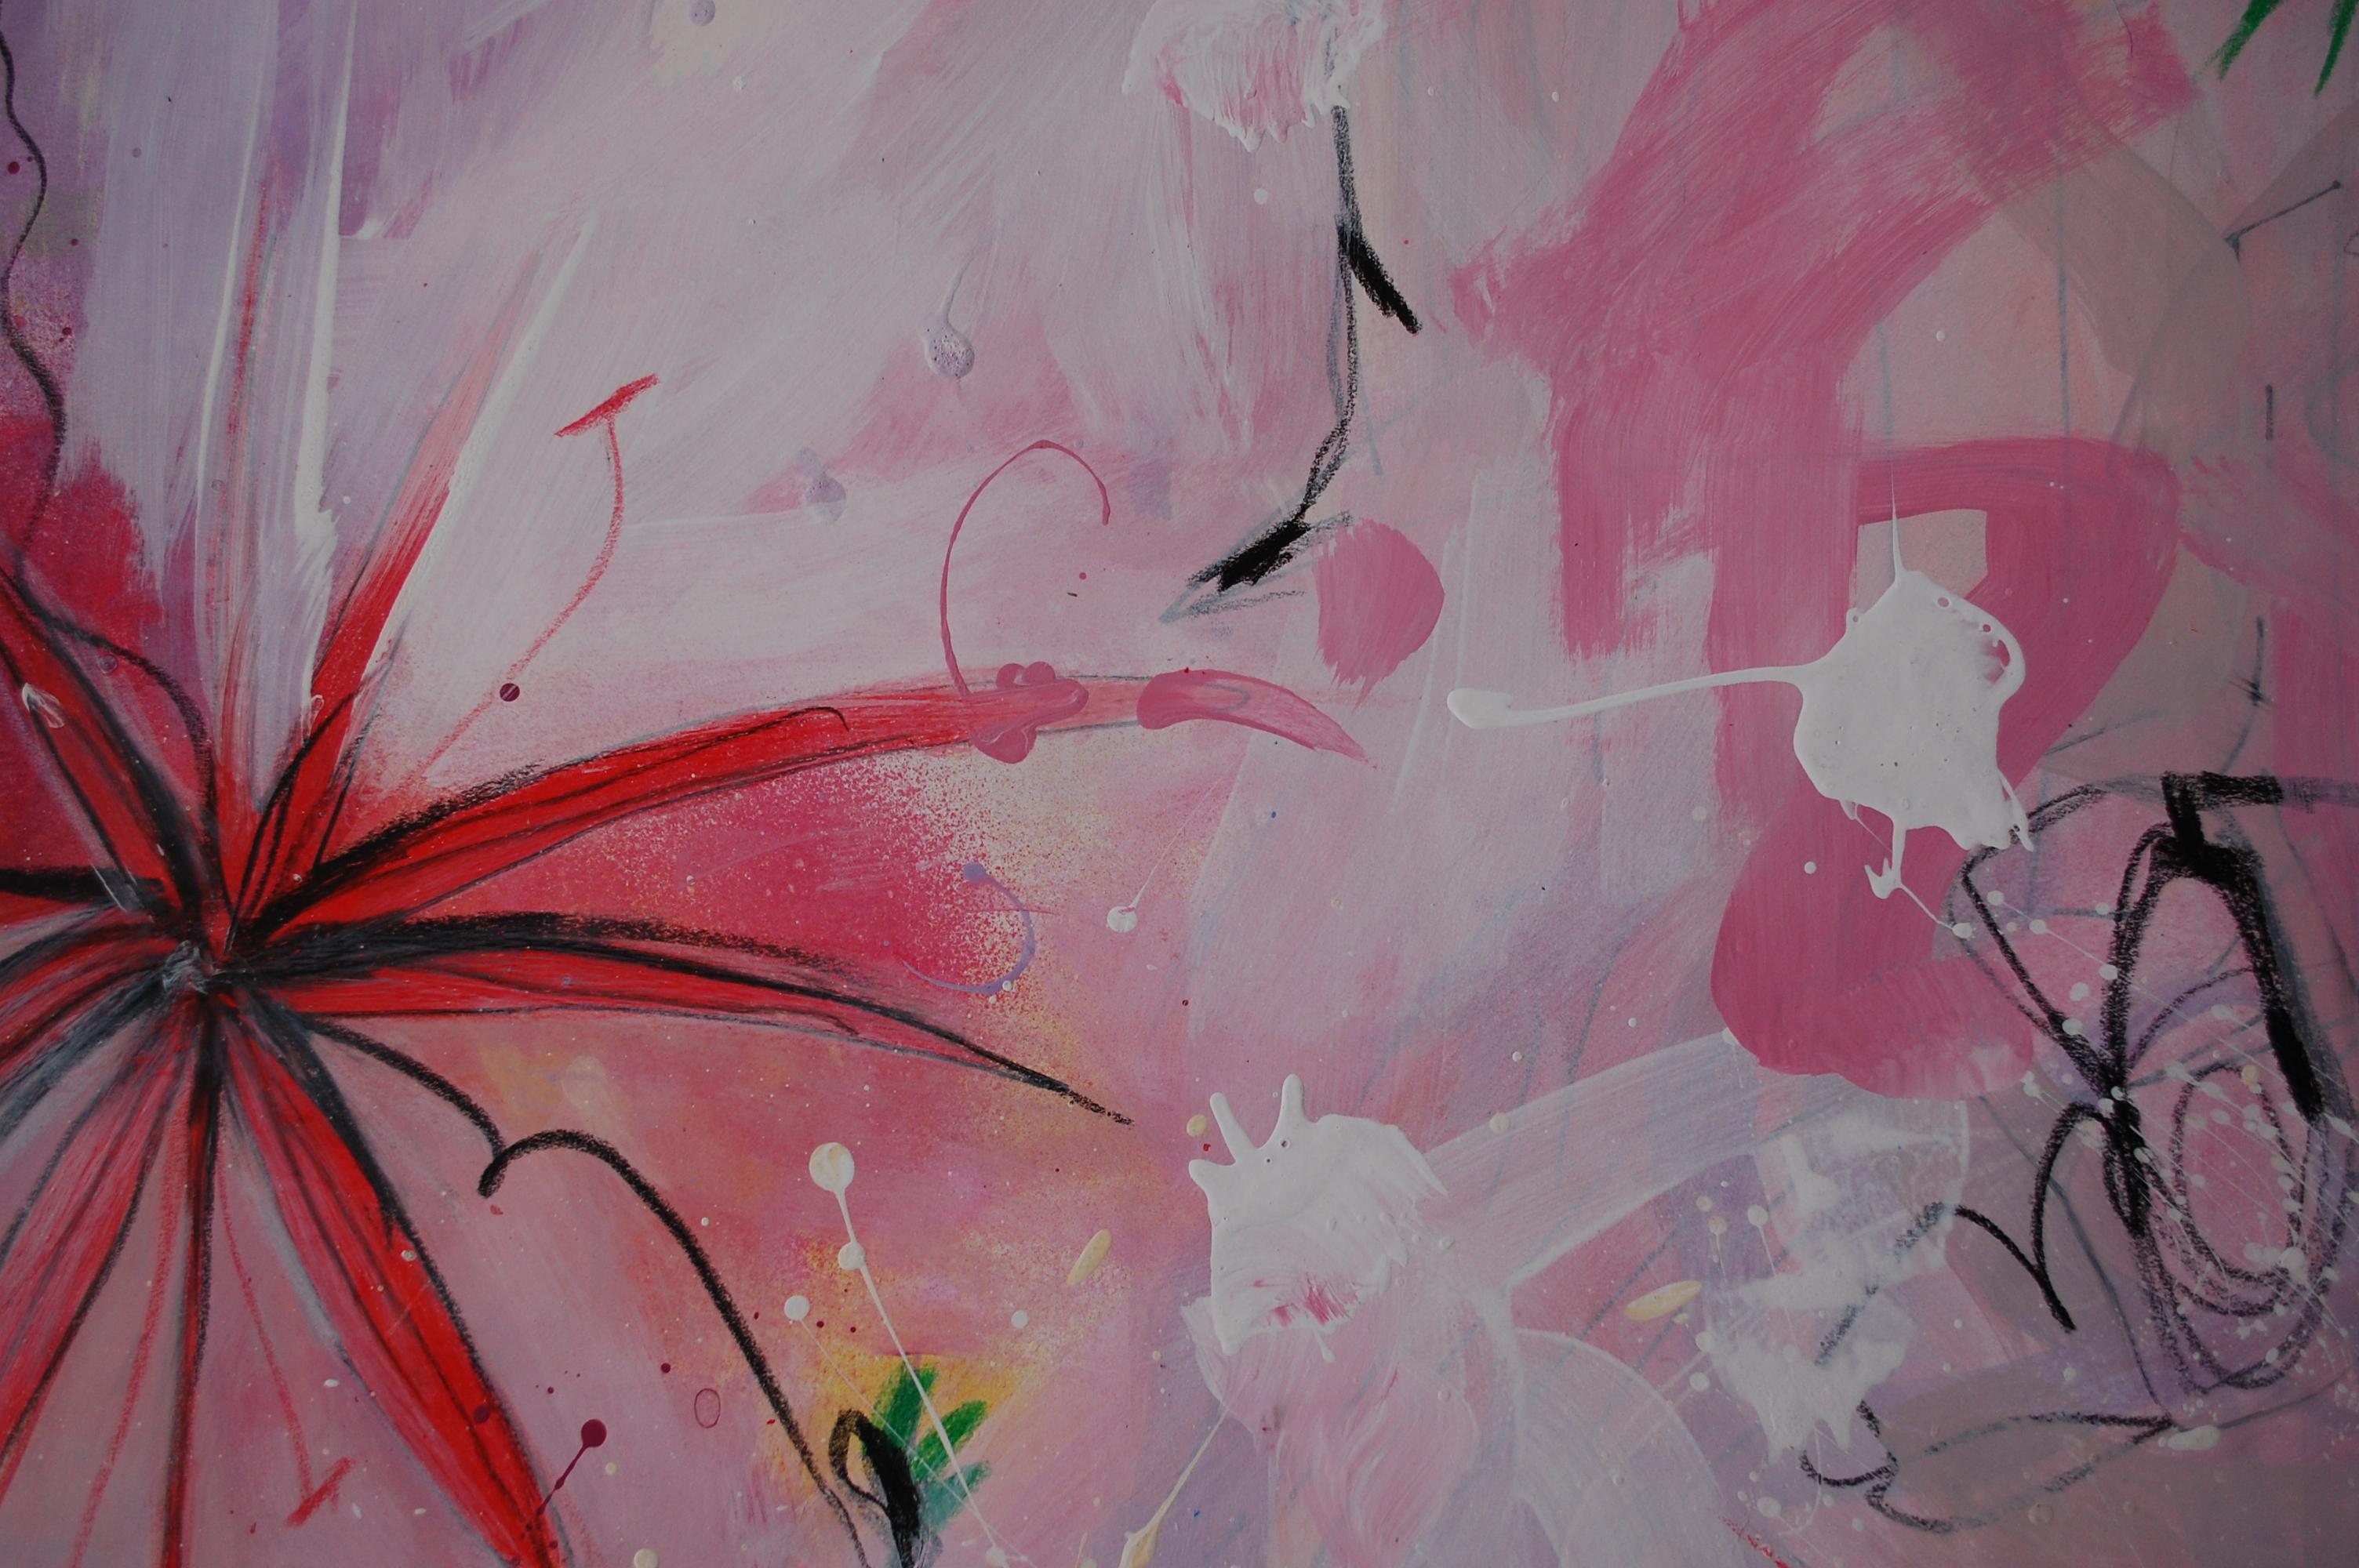  Lili Ocean Part 2 Pink Abstract.
 Mixed media: acrylic, ink marker, pastel on paper, white frame under Plexiglas.
Malgosia Kiernozycka was born in Wroclaw, Poland. She graduated high school at the School of Fine Arts and received a scholarship from